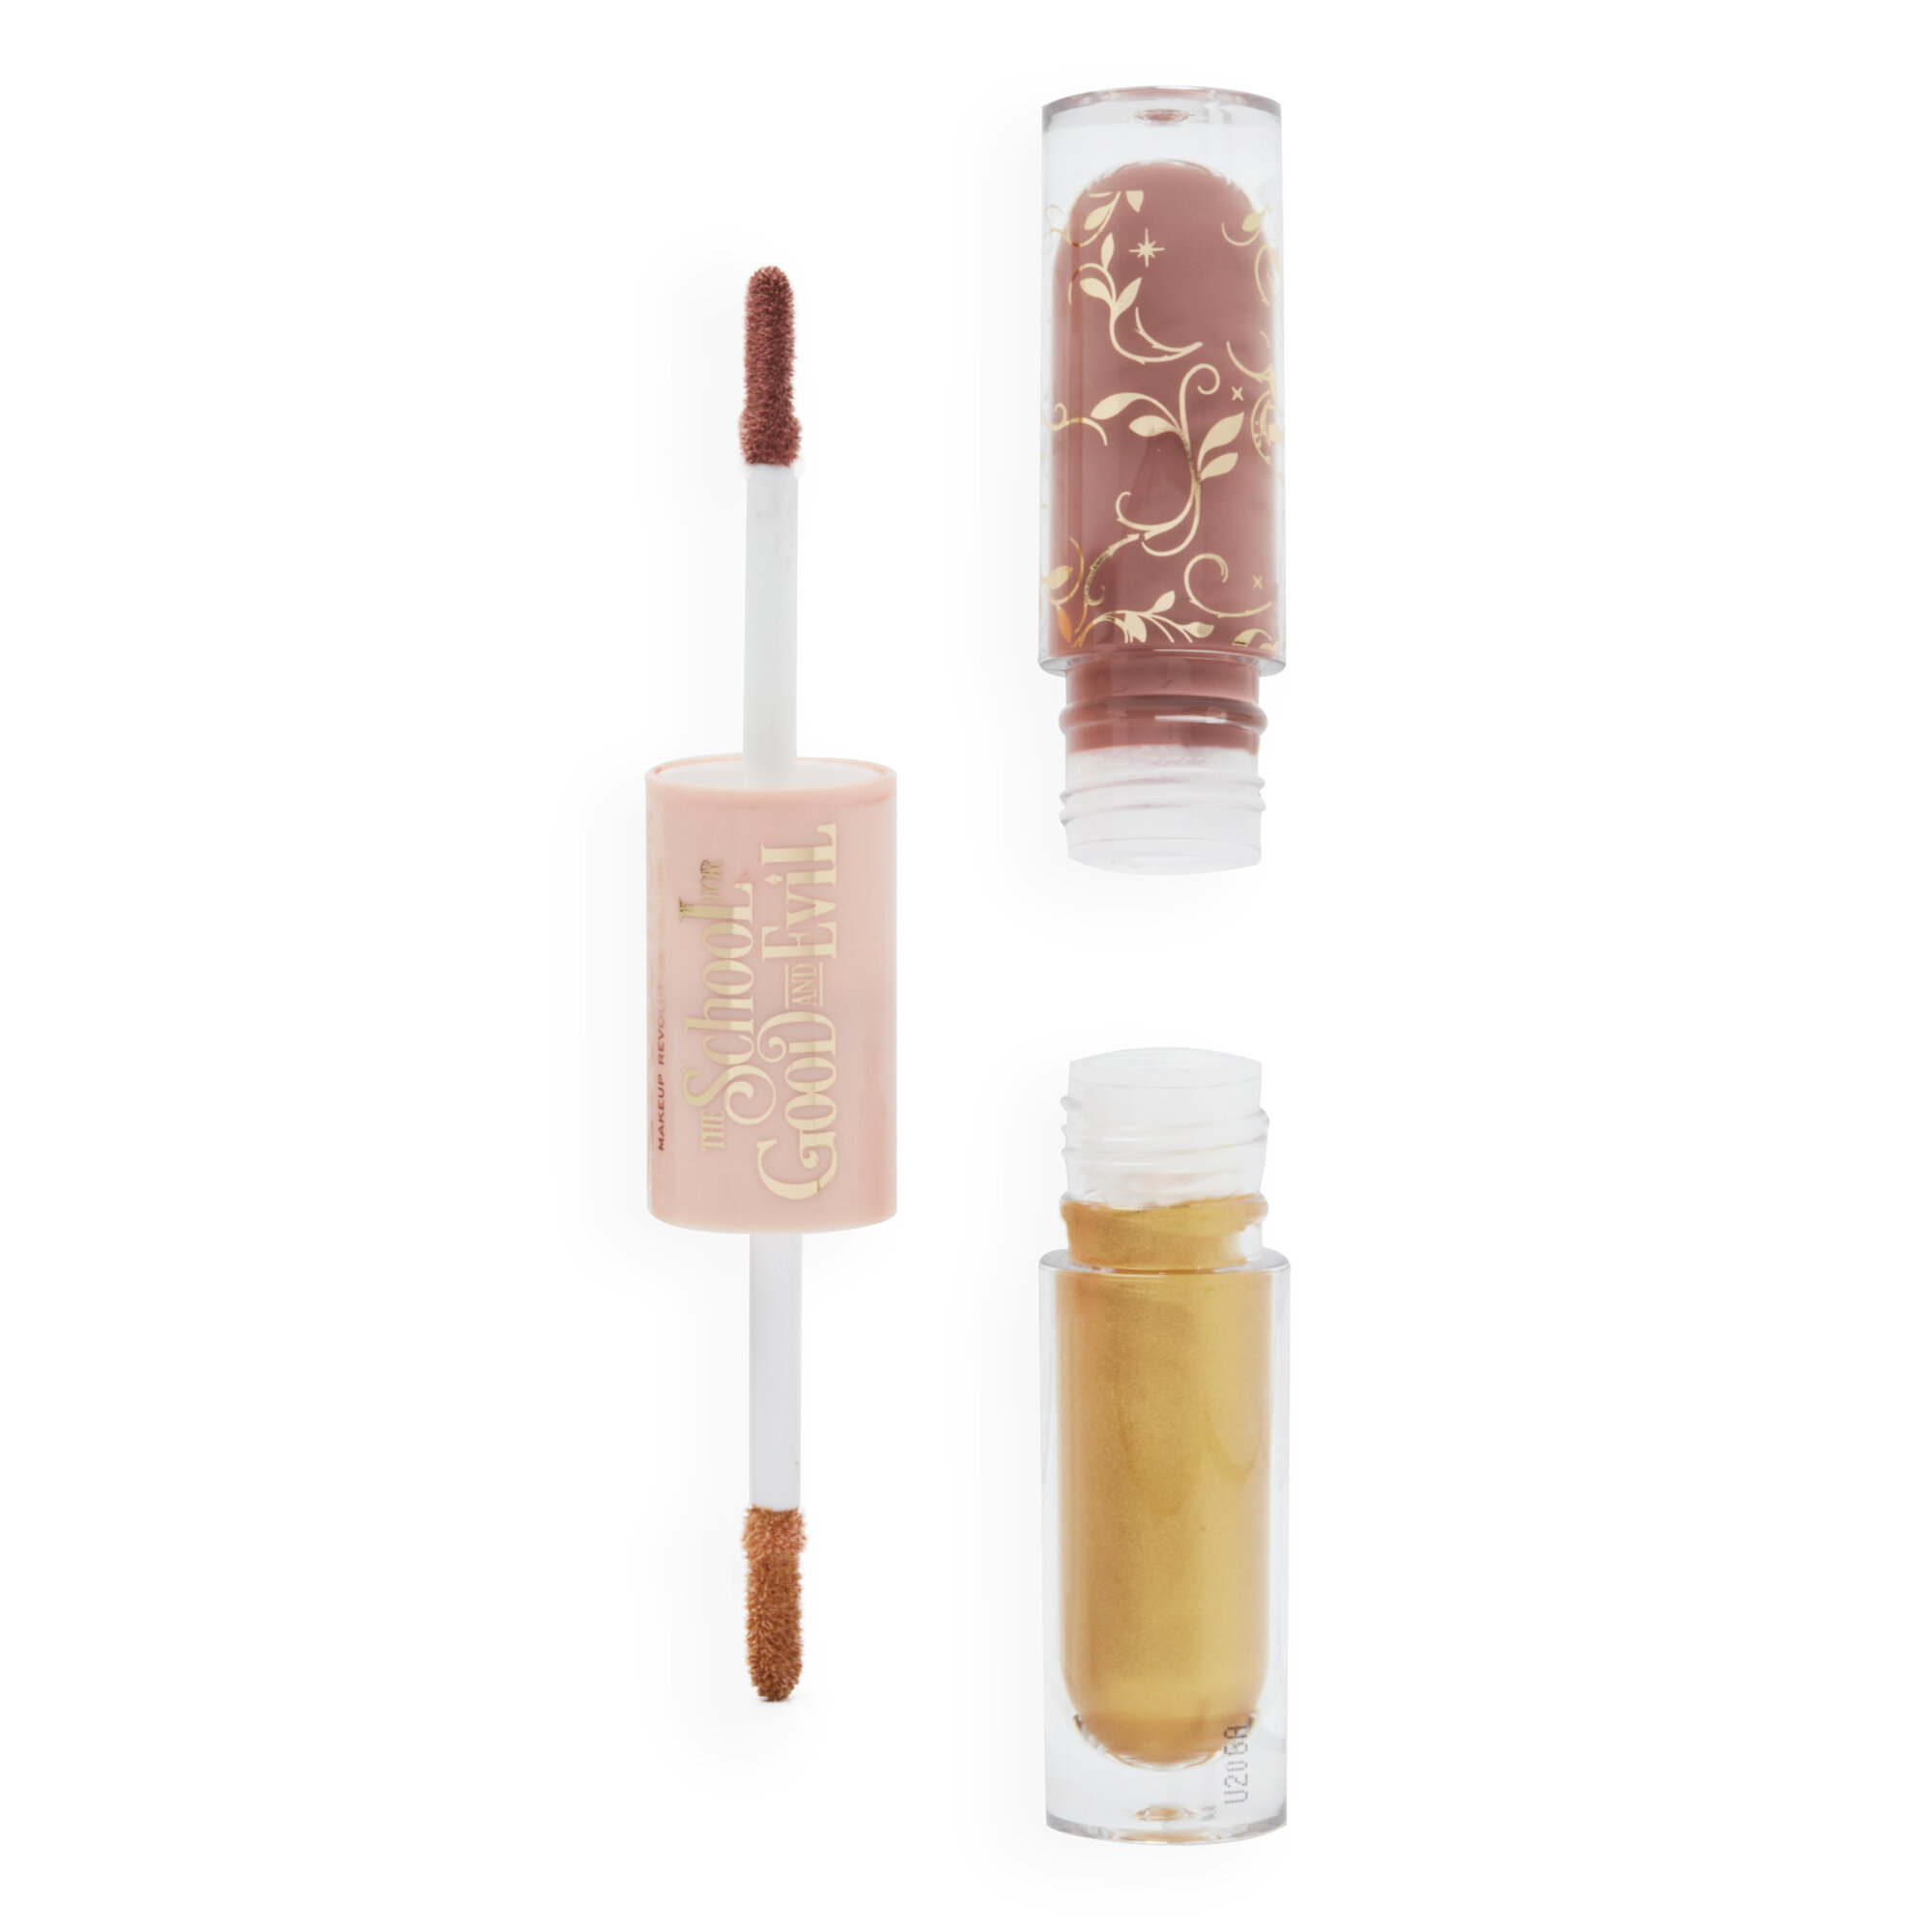 The School For Good & Evil x Makeup Revolution Evers Double Ended Liquid Eyeshadow